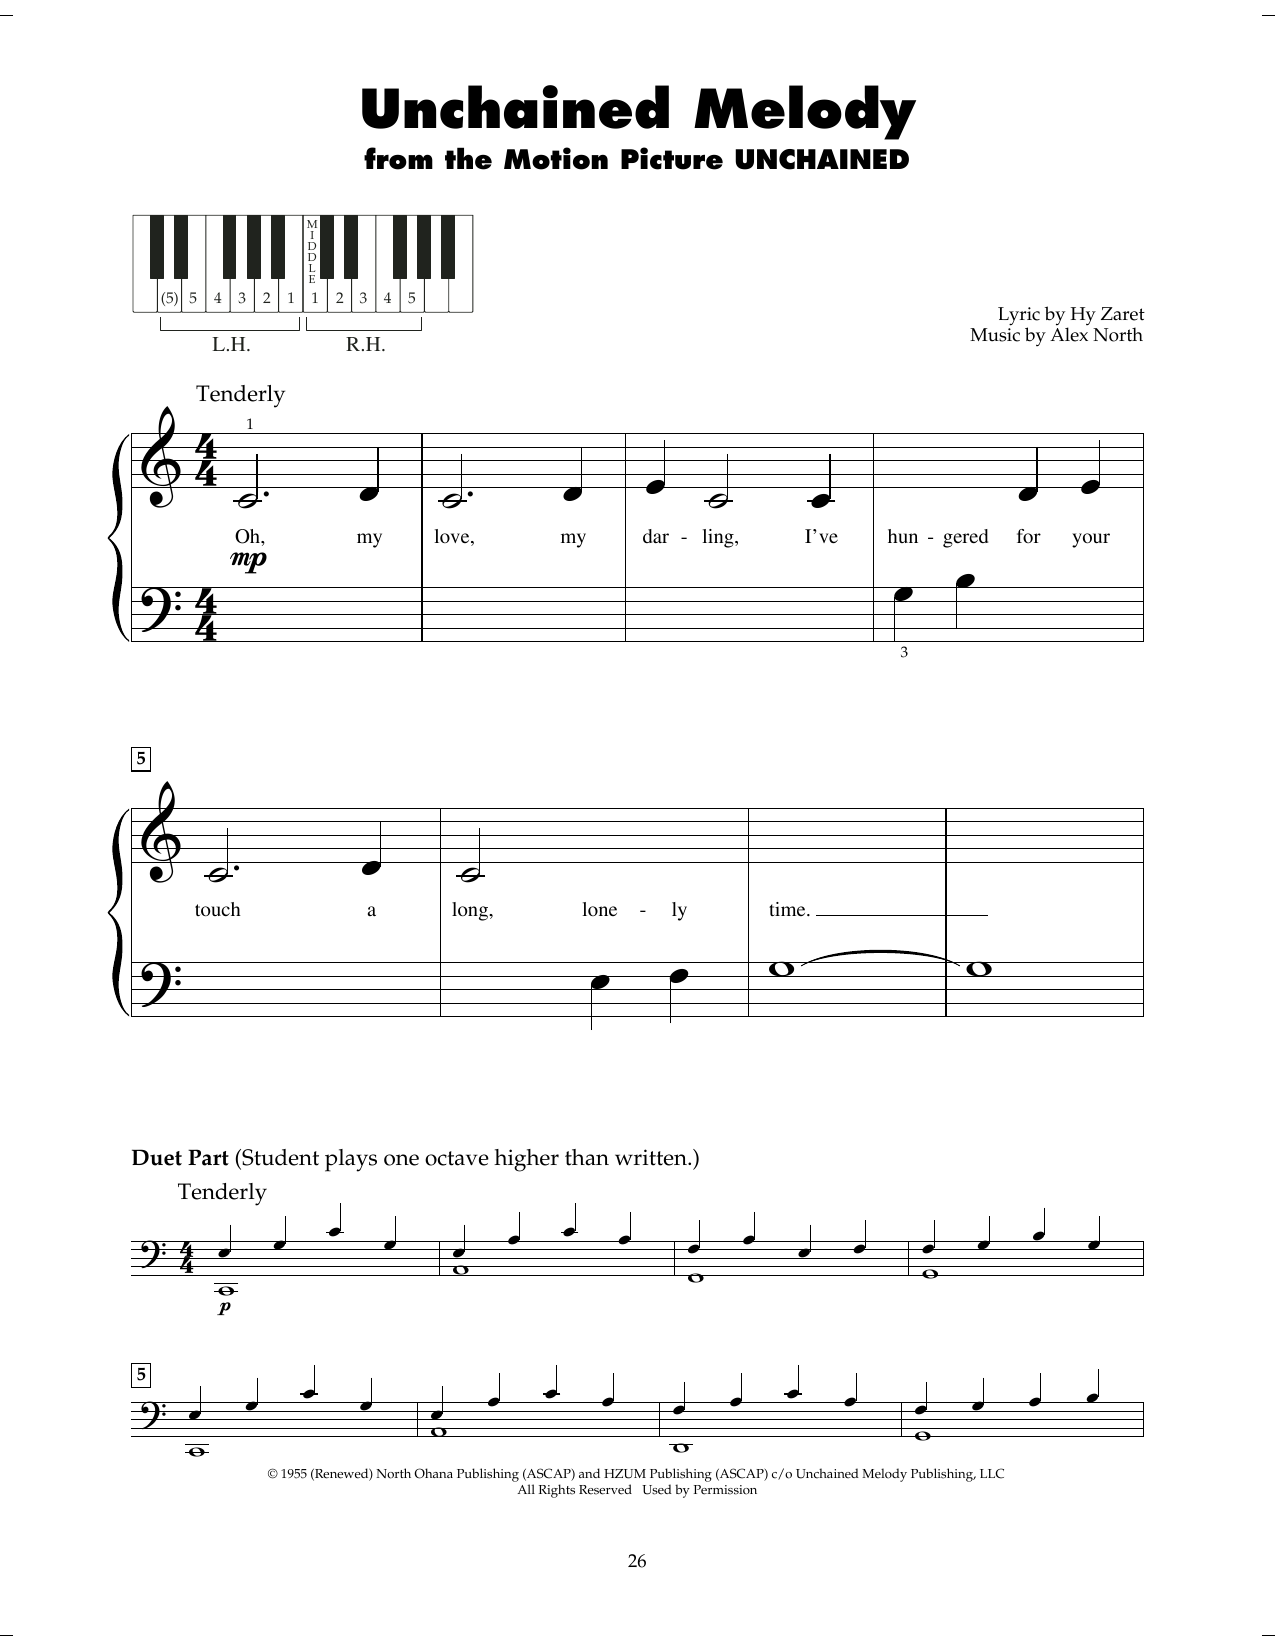 Download The Righteous Brothers Unchained Melody Sheet Music